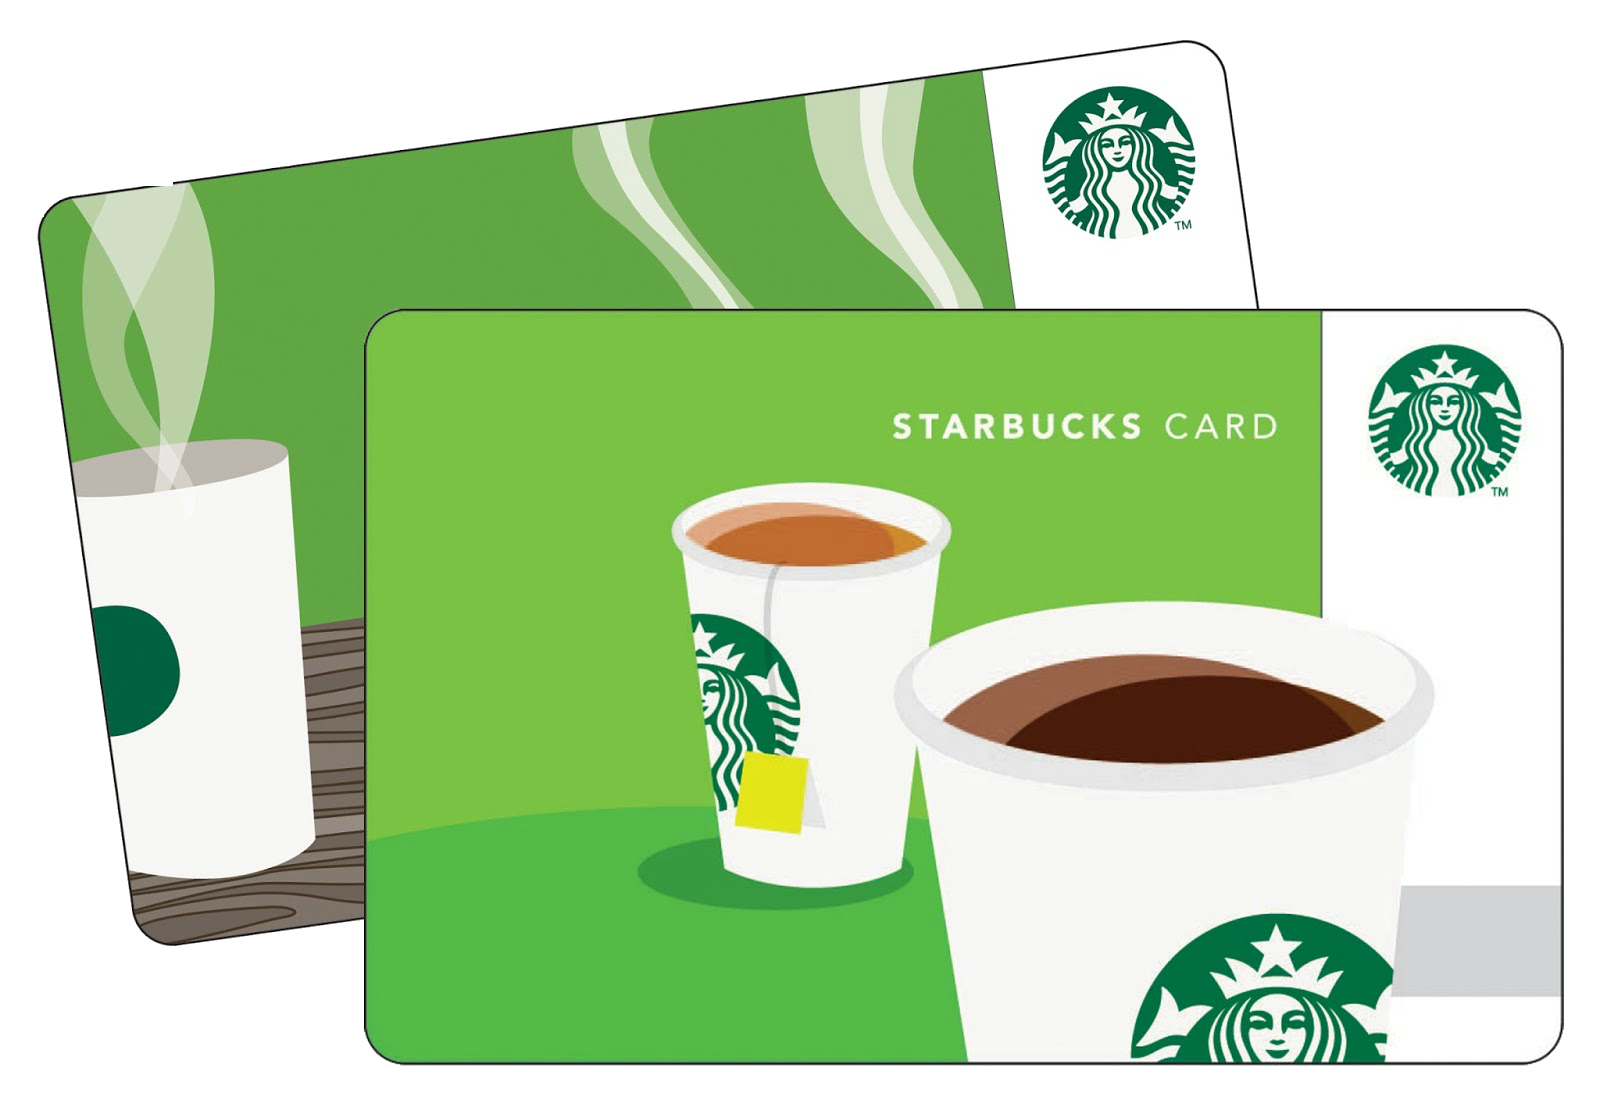 $10 Starbucks Gift Card - Free with Qualifying Purchases Over $100